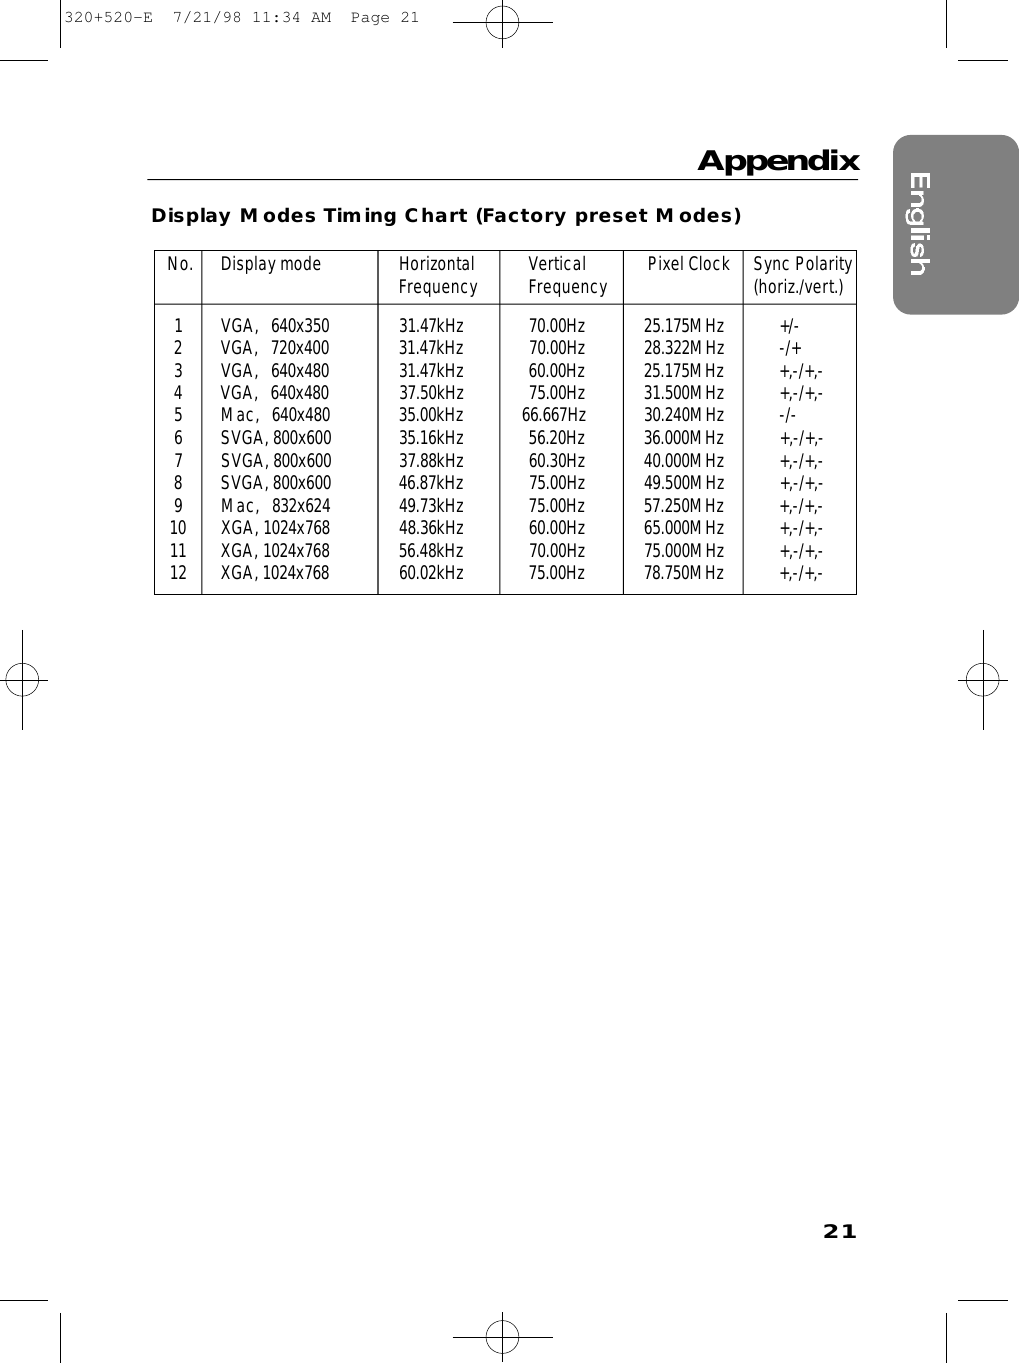 21Display Modes Timing Chart (Factory preset Modes)AppendixNo. Display mode Horizontal Vertical Pixel Clock Sync PolarityFrequency Frequency (horiz./vert.)1 VGA,   640x350 31.47kHz 70.00Hz 25.175MHz +/-2 VGA,   720x400 31.47kHz 70.00Hz 28.322MHz -/+3 VGA,   640x480 31.47kHz 60.00Hz 25.175MHz +,-/+,-4 VGA,   640x480 37.50kHz 75.00Hz 31.500MHz +,-/+,-5 Mac,   640x480 35.00kHz              66.667Hz 30.240MHz -/-6 SVGA, 800x600 35.16kHz 56.20Hz 36.000MHz +,-/+,-7 SVGA, 800x600 37.88kHz 60.30Hz 40.000MHz +,-/+,-8 SVGA, 800x600 46.87kHz 75.00Hz 49.500MHz +,-/+,-9 Mac,   832x624 49.73kHz 75.00Hz 57.250MHz +,-/+,-10 XGA, 1024x768 48.36kHz 60.00Hz 65.000MHz +,-/+,-11 XGA, 1024x768 56.48kHz 70.00Hz 75.000MHz +,-/+,-12 XGA, 1024x768 60.02kHz 75.00Hz 78.750MHz +,-/+,-320+520-E  7/21/98 11:34 AM  Page 21